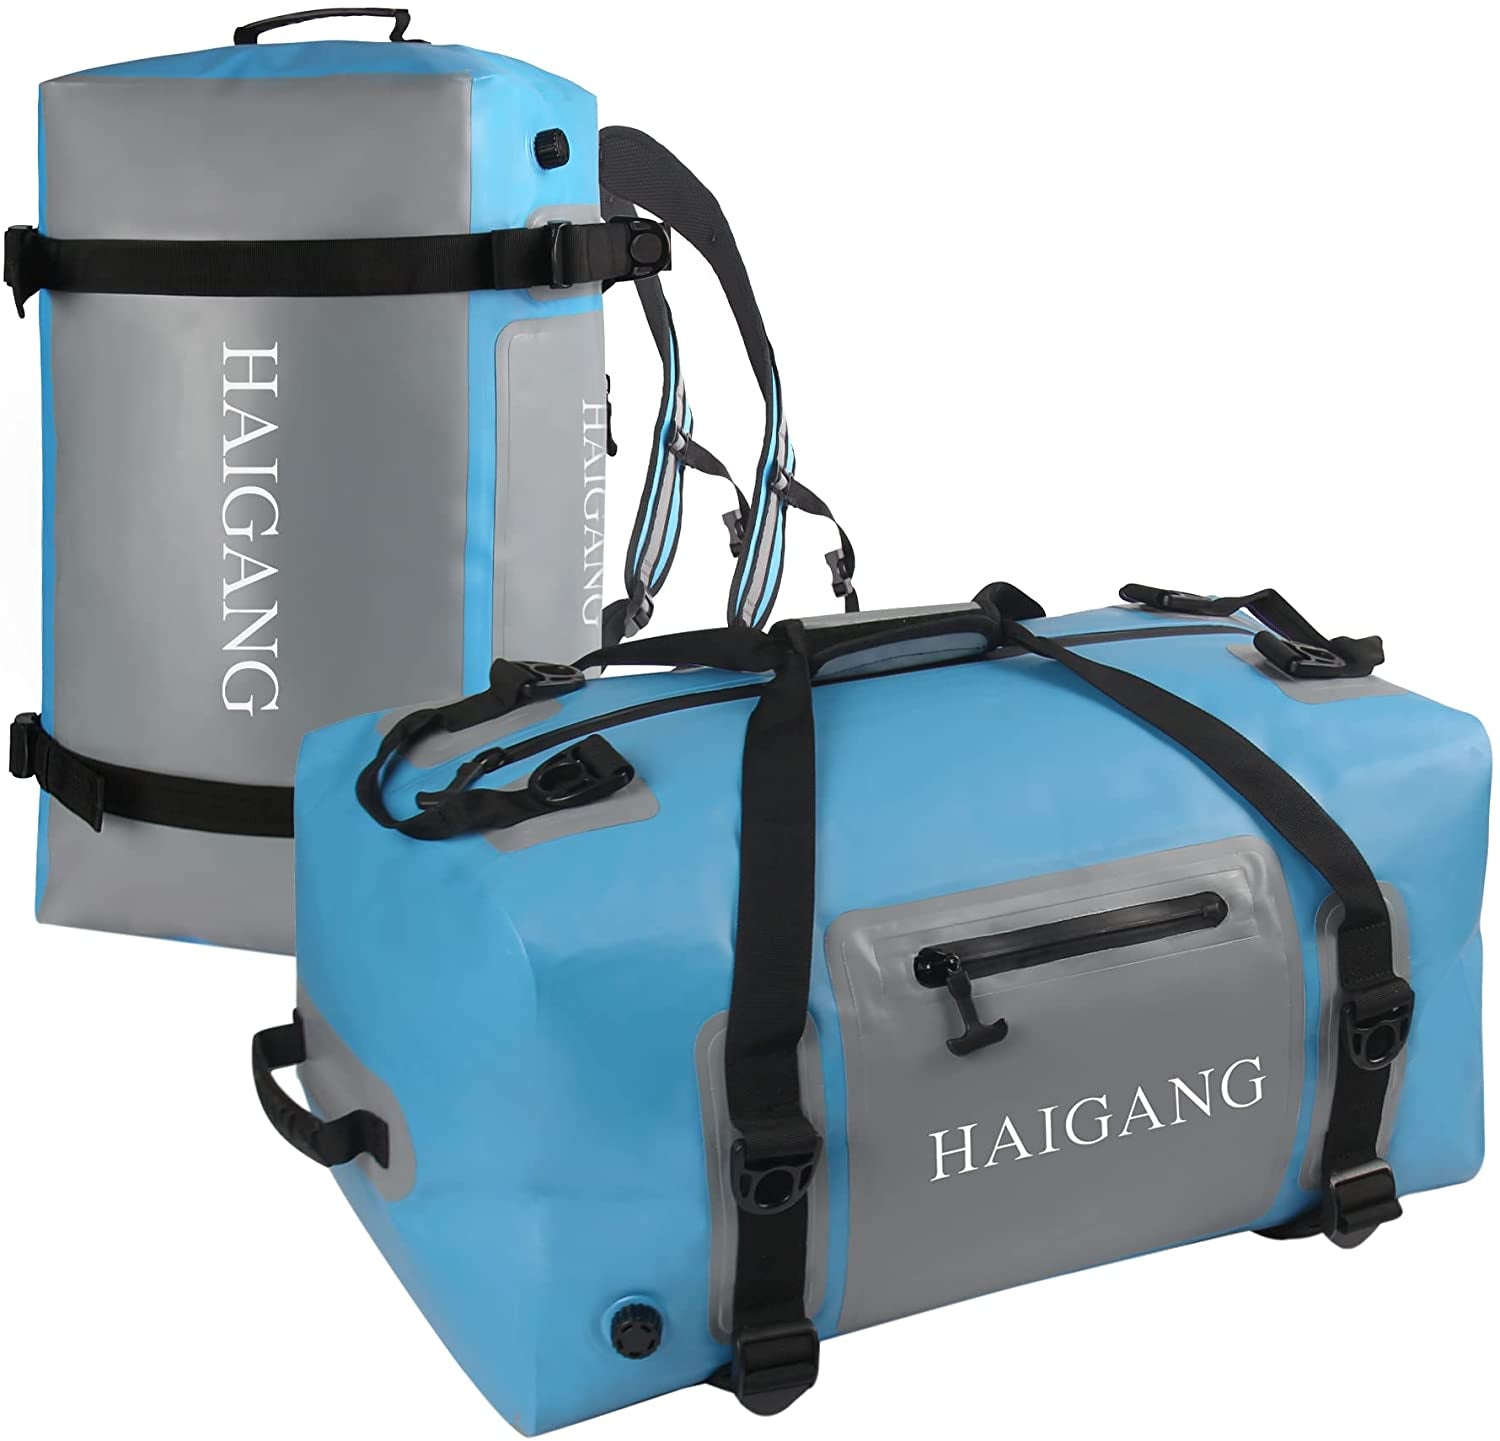 Haigang 70L/110L Waterproof Duffel Bag, Large Capacity, Adjustable Thickened Straps and Handles, Zip Closure, Air Valve Keeps Equipment Safe, Perfect for Boating Rafting Motorcycle Camping Kayak